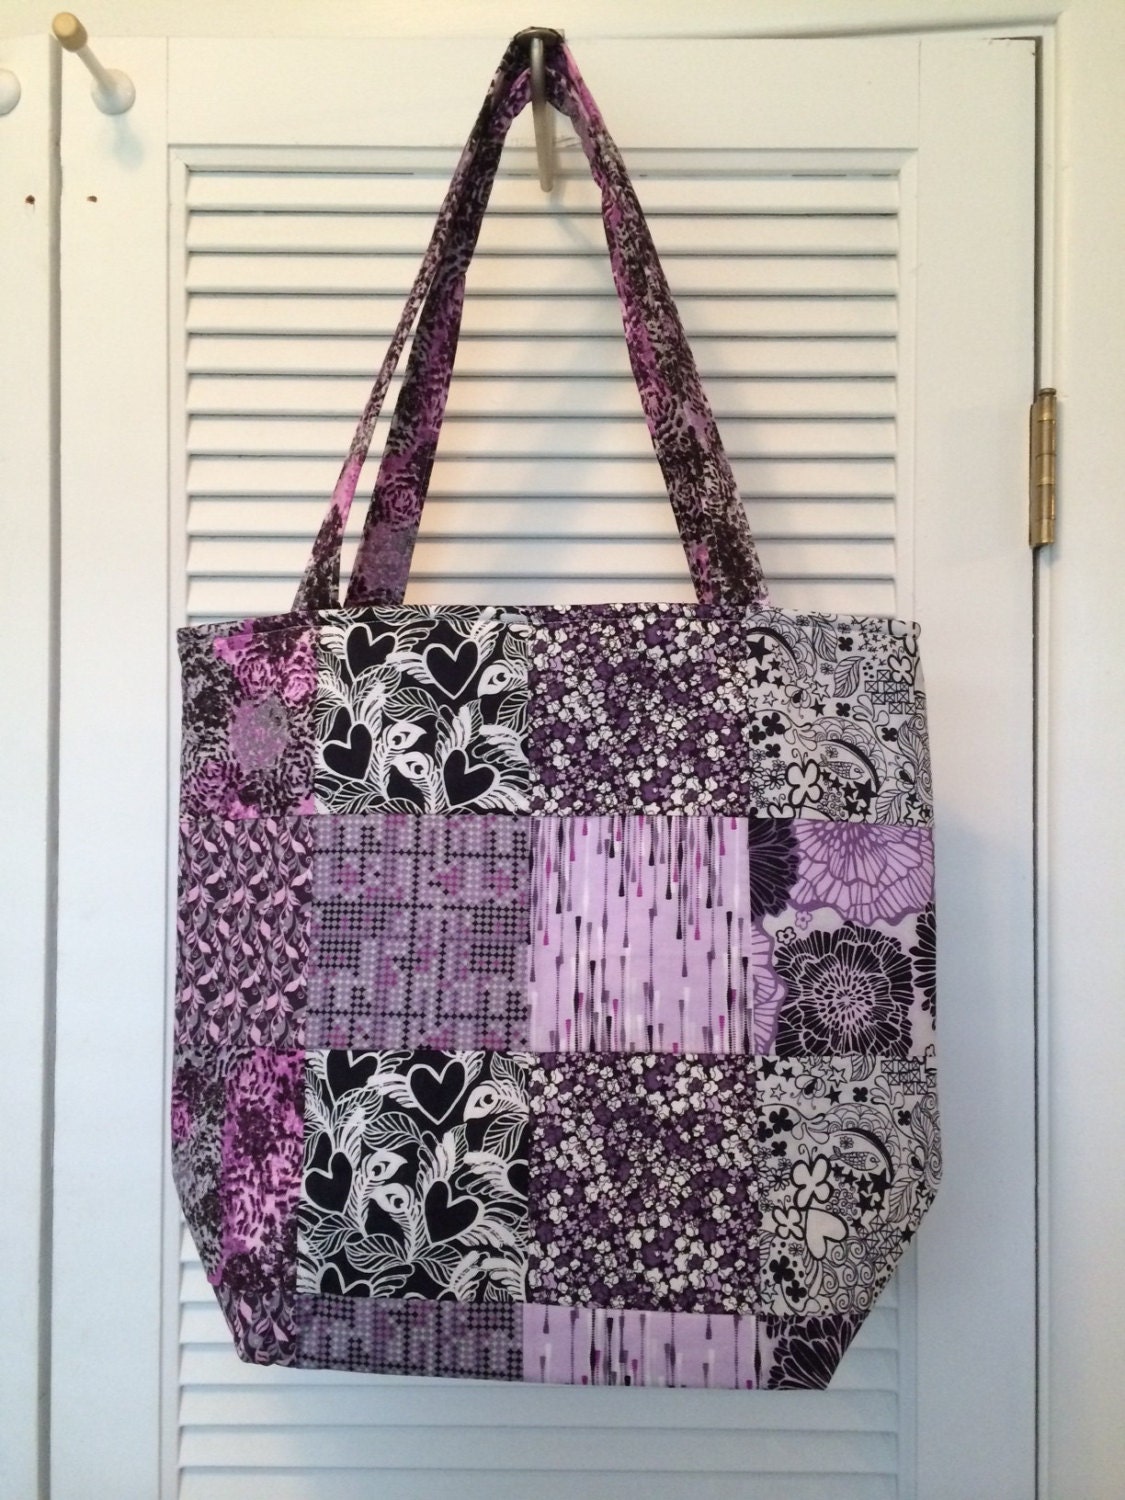 Quilted Tote Bag Purple Black Gray by LimitlessStitches on Etsy